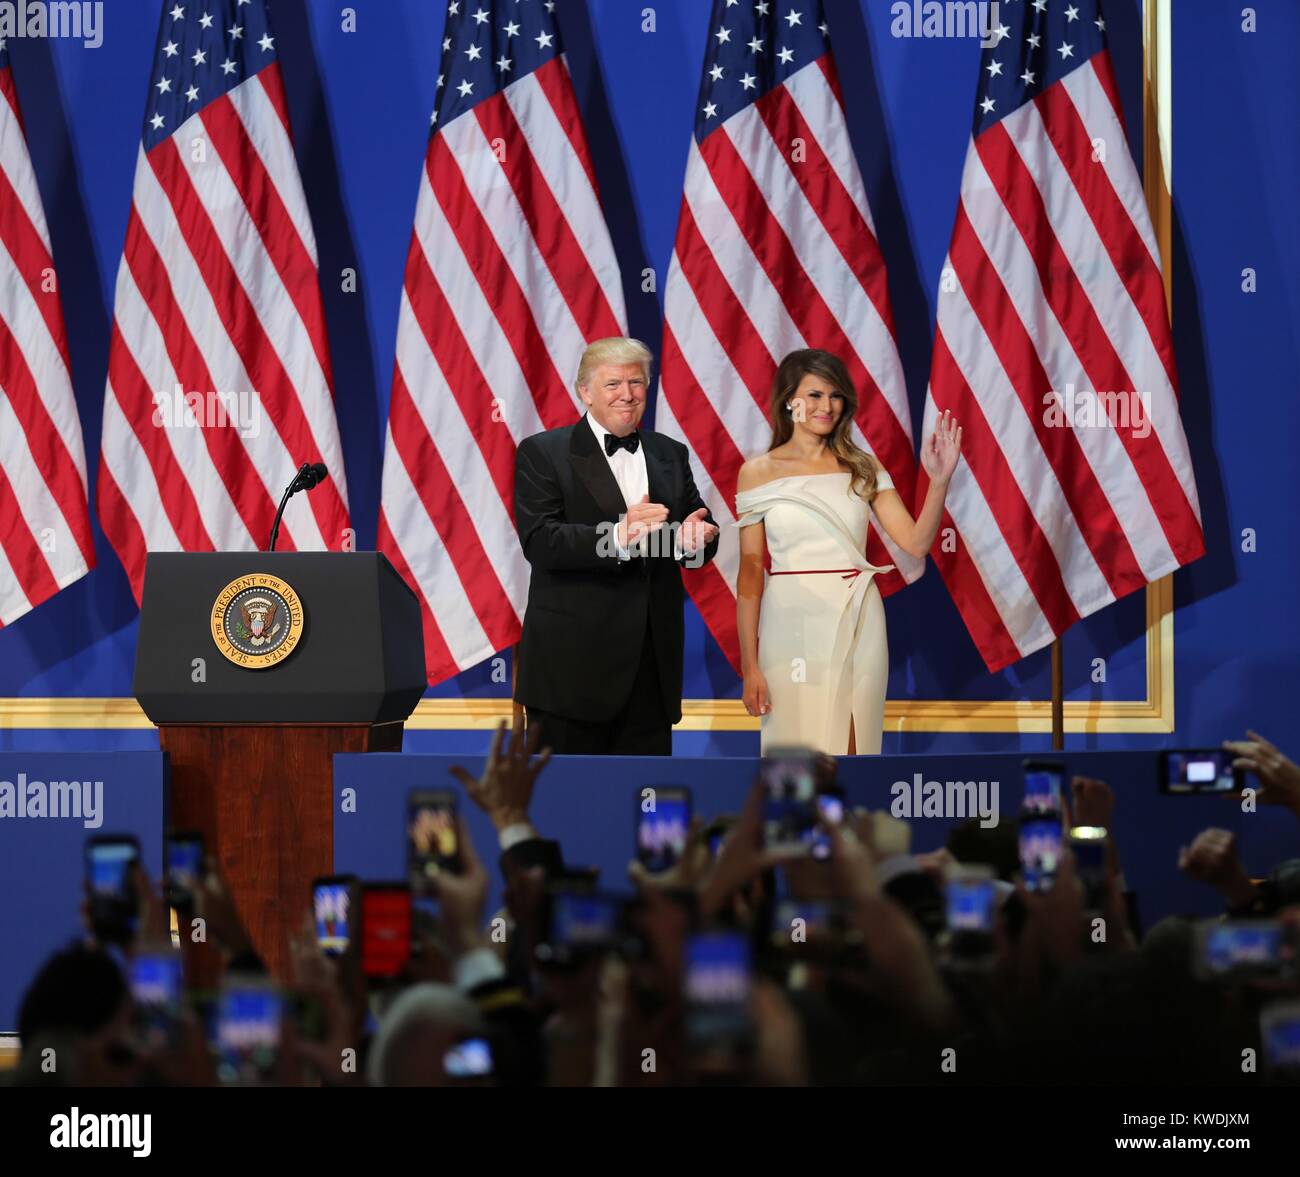 President Donald Trump and First Lady Melania at the SALUTE TO OUR ARMED FORCES BALL. One of three official inaugural balls, it paid tribute to members the armed forces, first responders, and emergency personnel. Jan. 20, 2017, Washington, DC (BSLOC 2017 19 2) Stock Photo